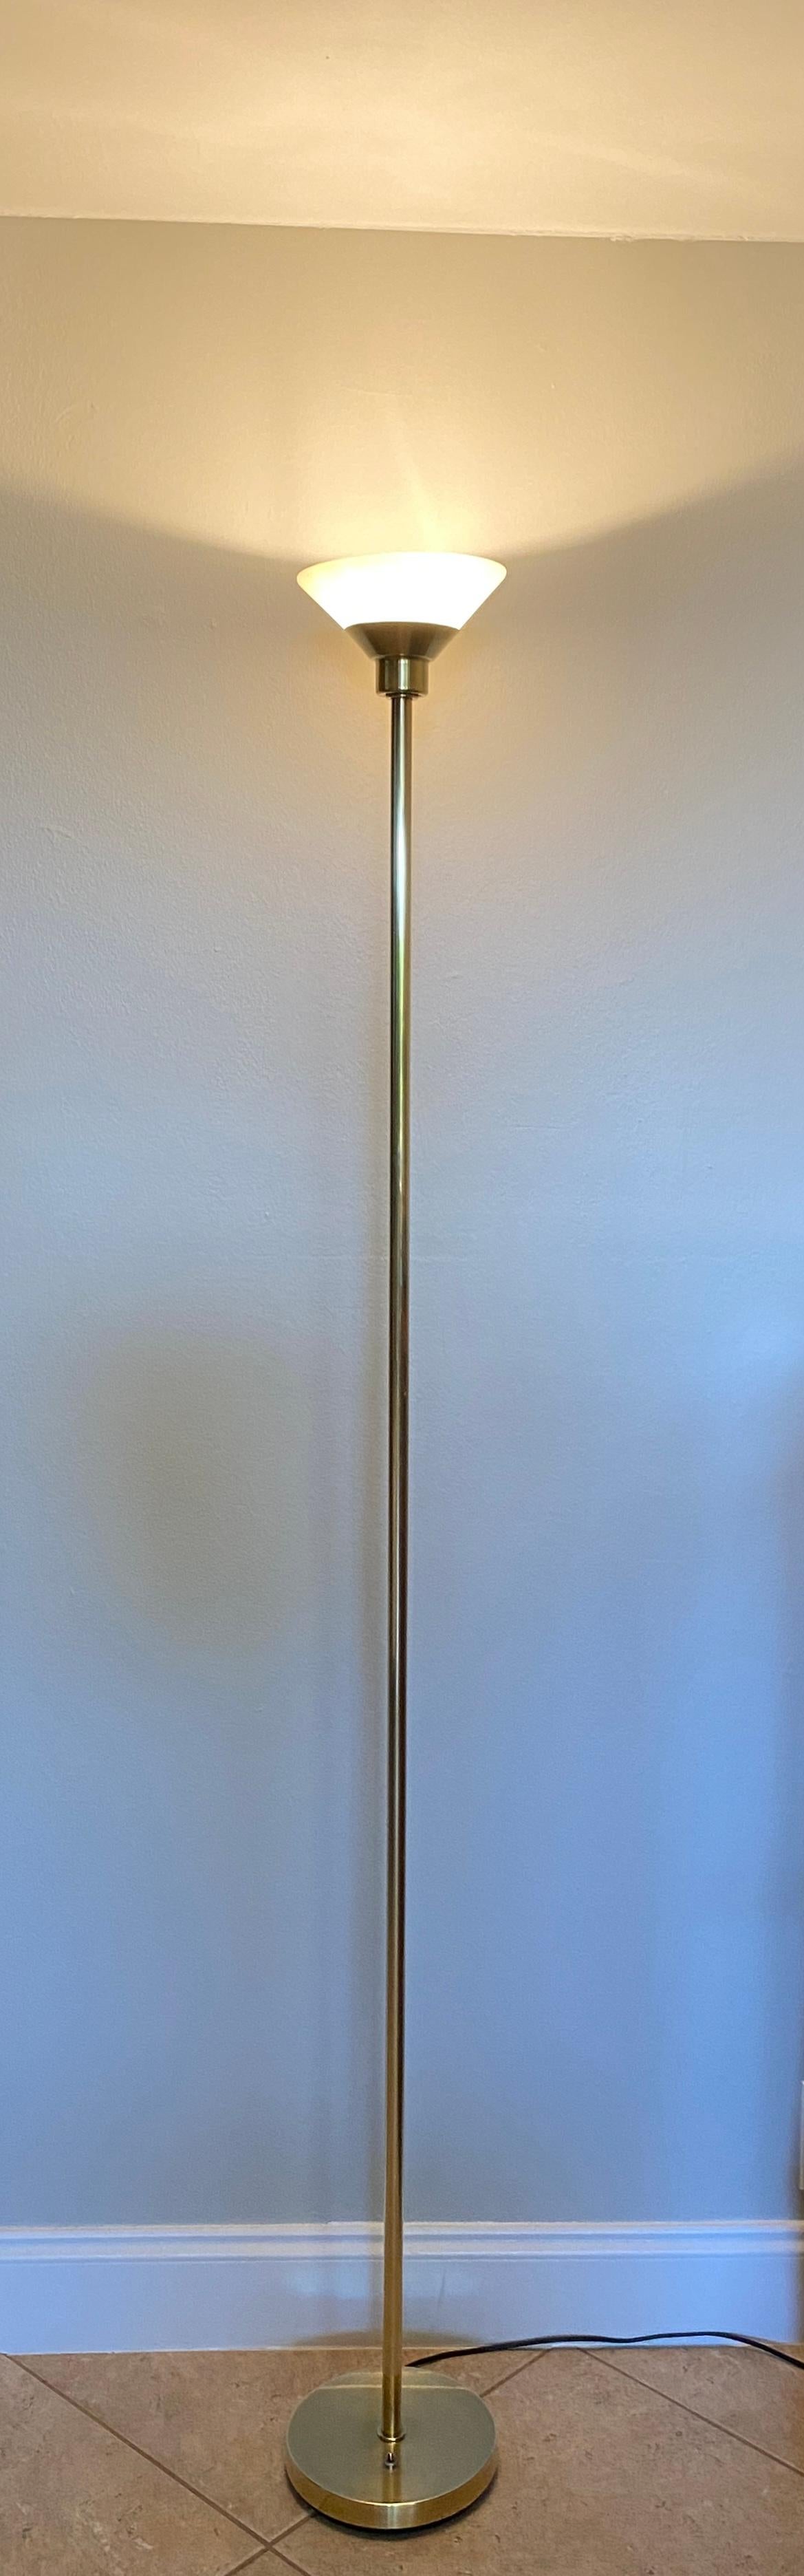 Iconic American made Koch and Lowy polished brass floor lamp. 

This Koch and Lowy floor lamp is absolutely beautiful, its minimal mid century design makes it suitable for any themed setting whether modern, contemporary, mid-century or traditional.